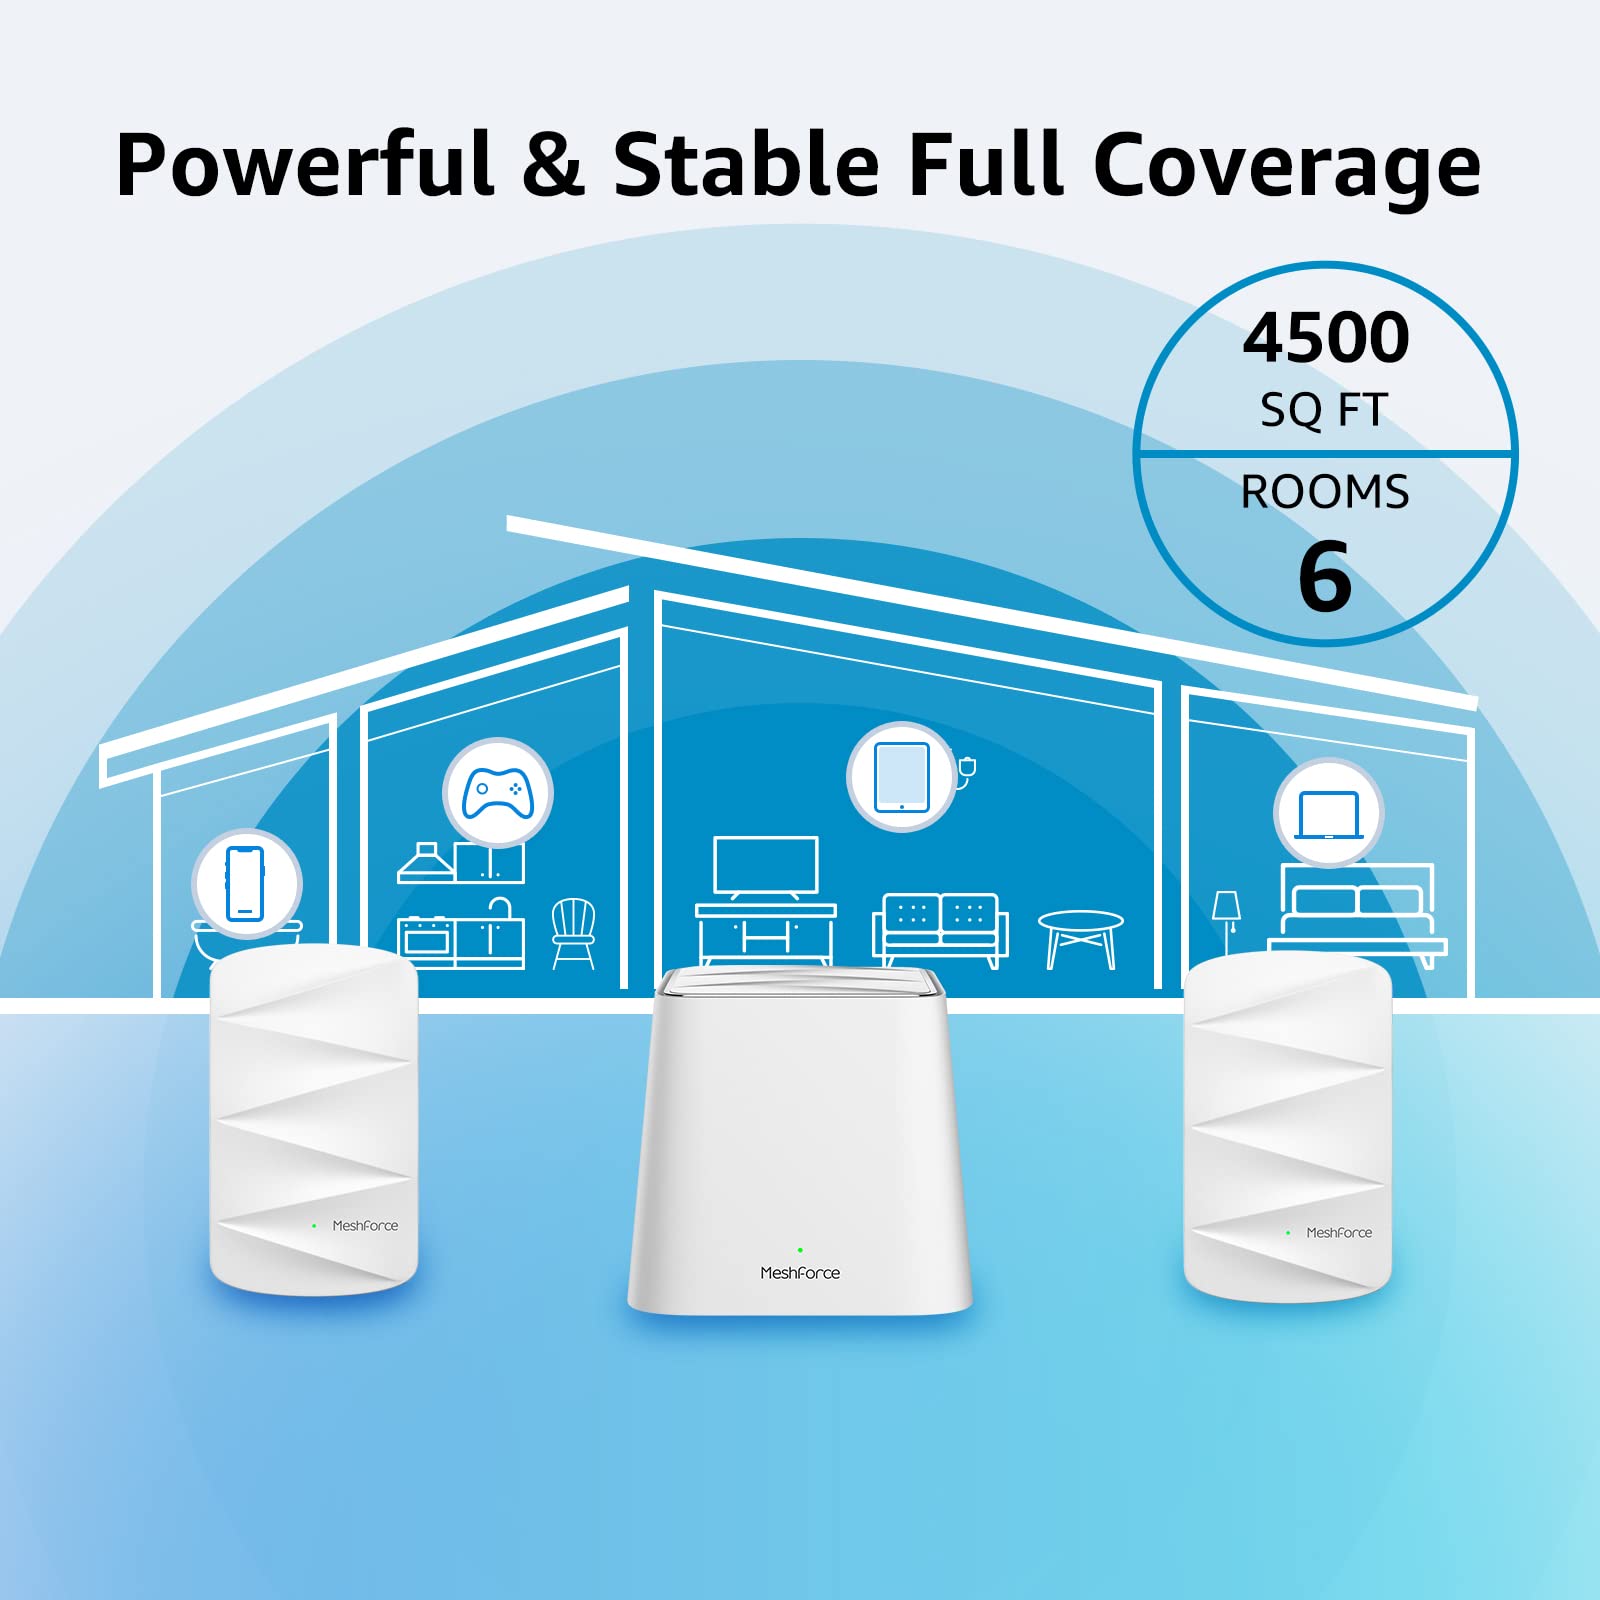 Meshforce Mesh WiFi System M3 (2023 Model) - Up to 4,500 sq. ft. Whole Home Coverage - Gigabit WiFi Router Replacement - Mesh Router for Wireless Internet (3 Pack)